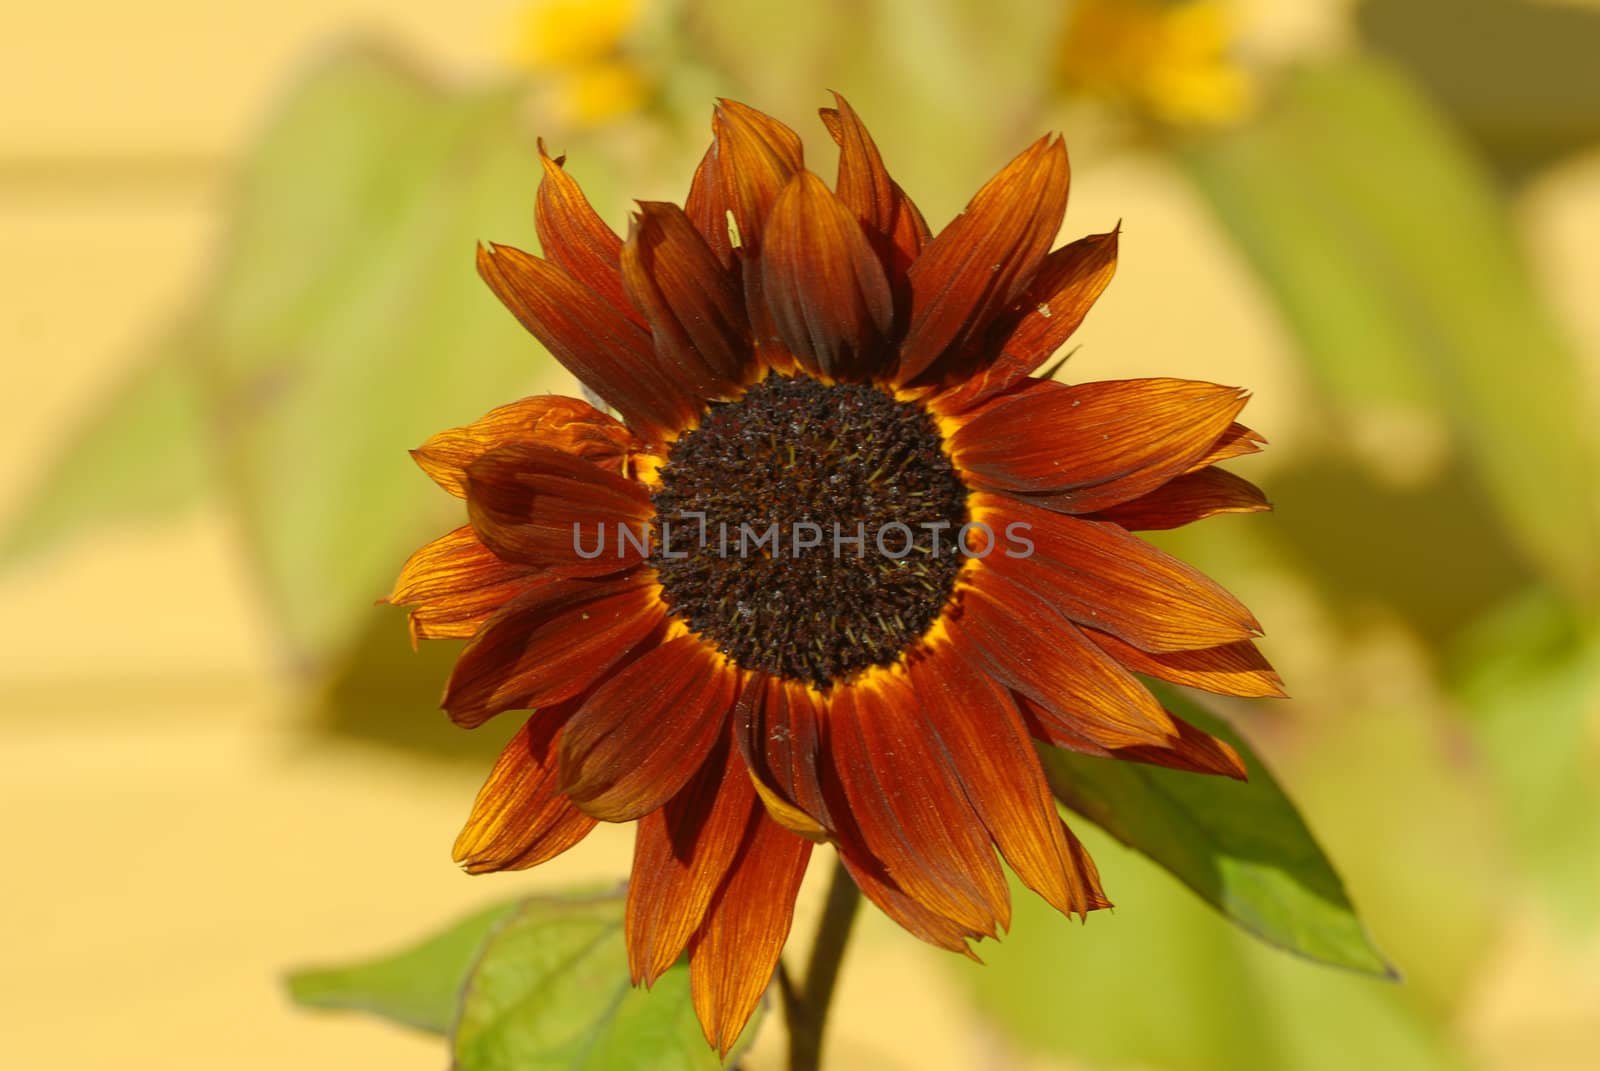 a sunflower with a tan